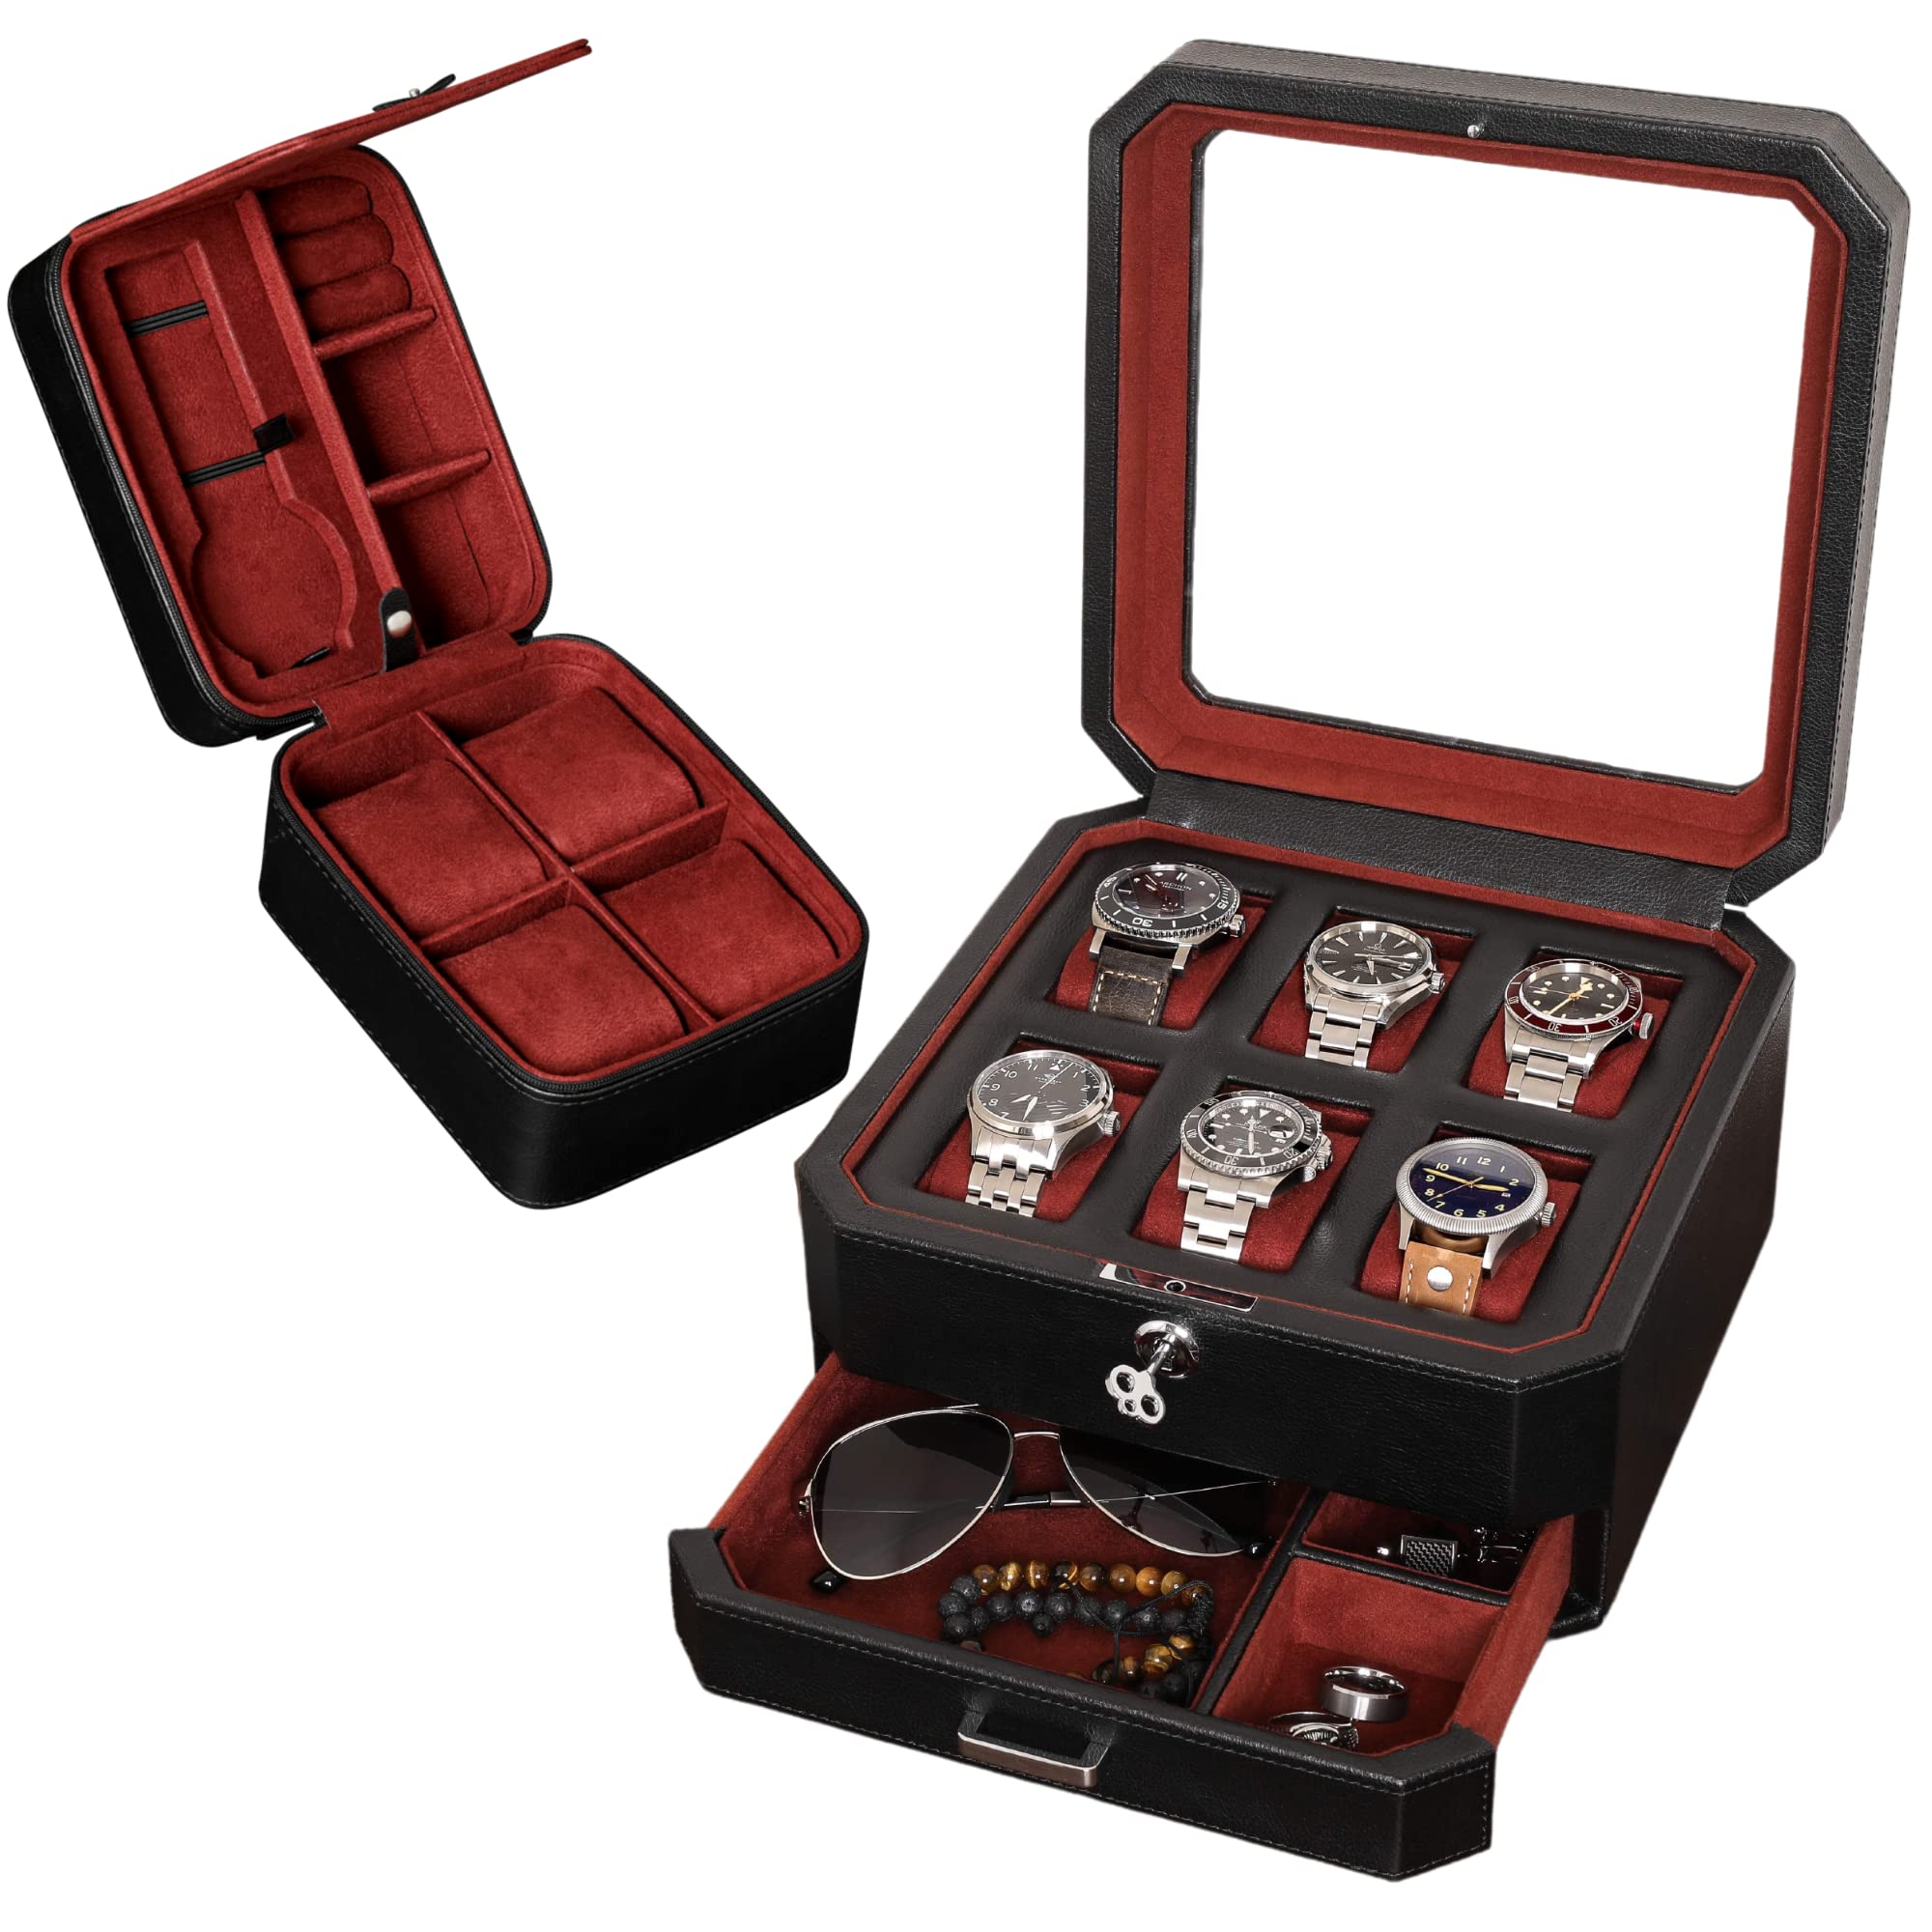 ROTHWELL Gift Set 6 Slot Leather Watch Box & Matching 5 Watch Travel Case - Luxury Watch Case Display Organizer, Locking Mens Jewelry Watches Holder, Men's Storage Boxes Glass Top Black/Red